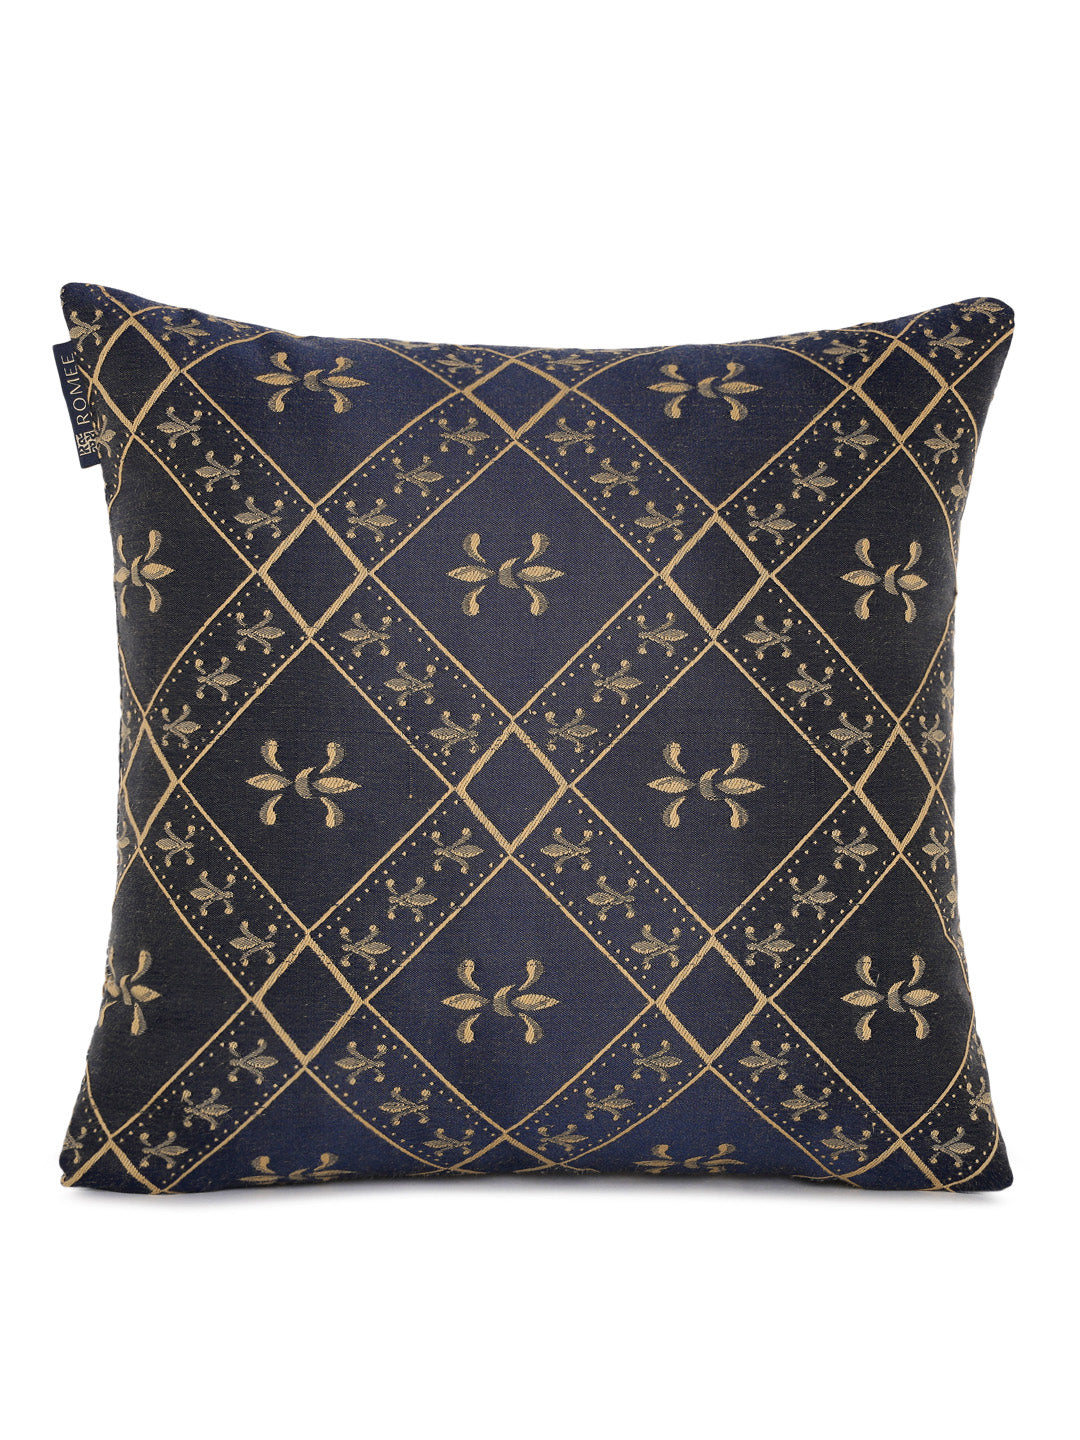 Soft Poly Cotton Ethnic Motifs Printed Cushion Covers 16x16  Set of 5 - Navy Blue